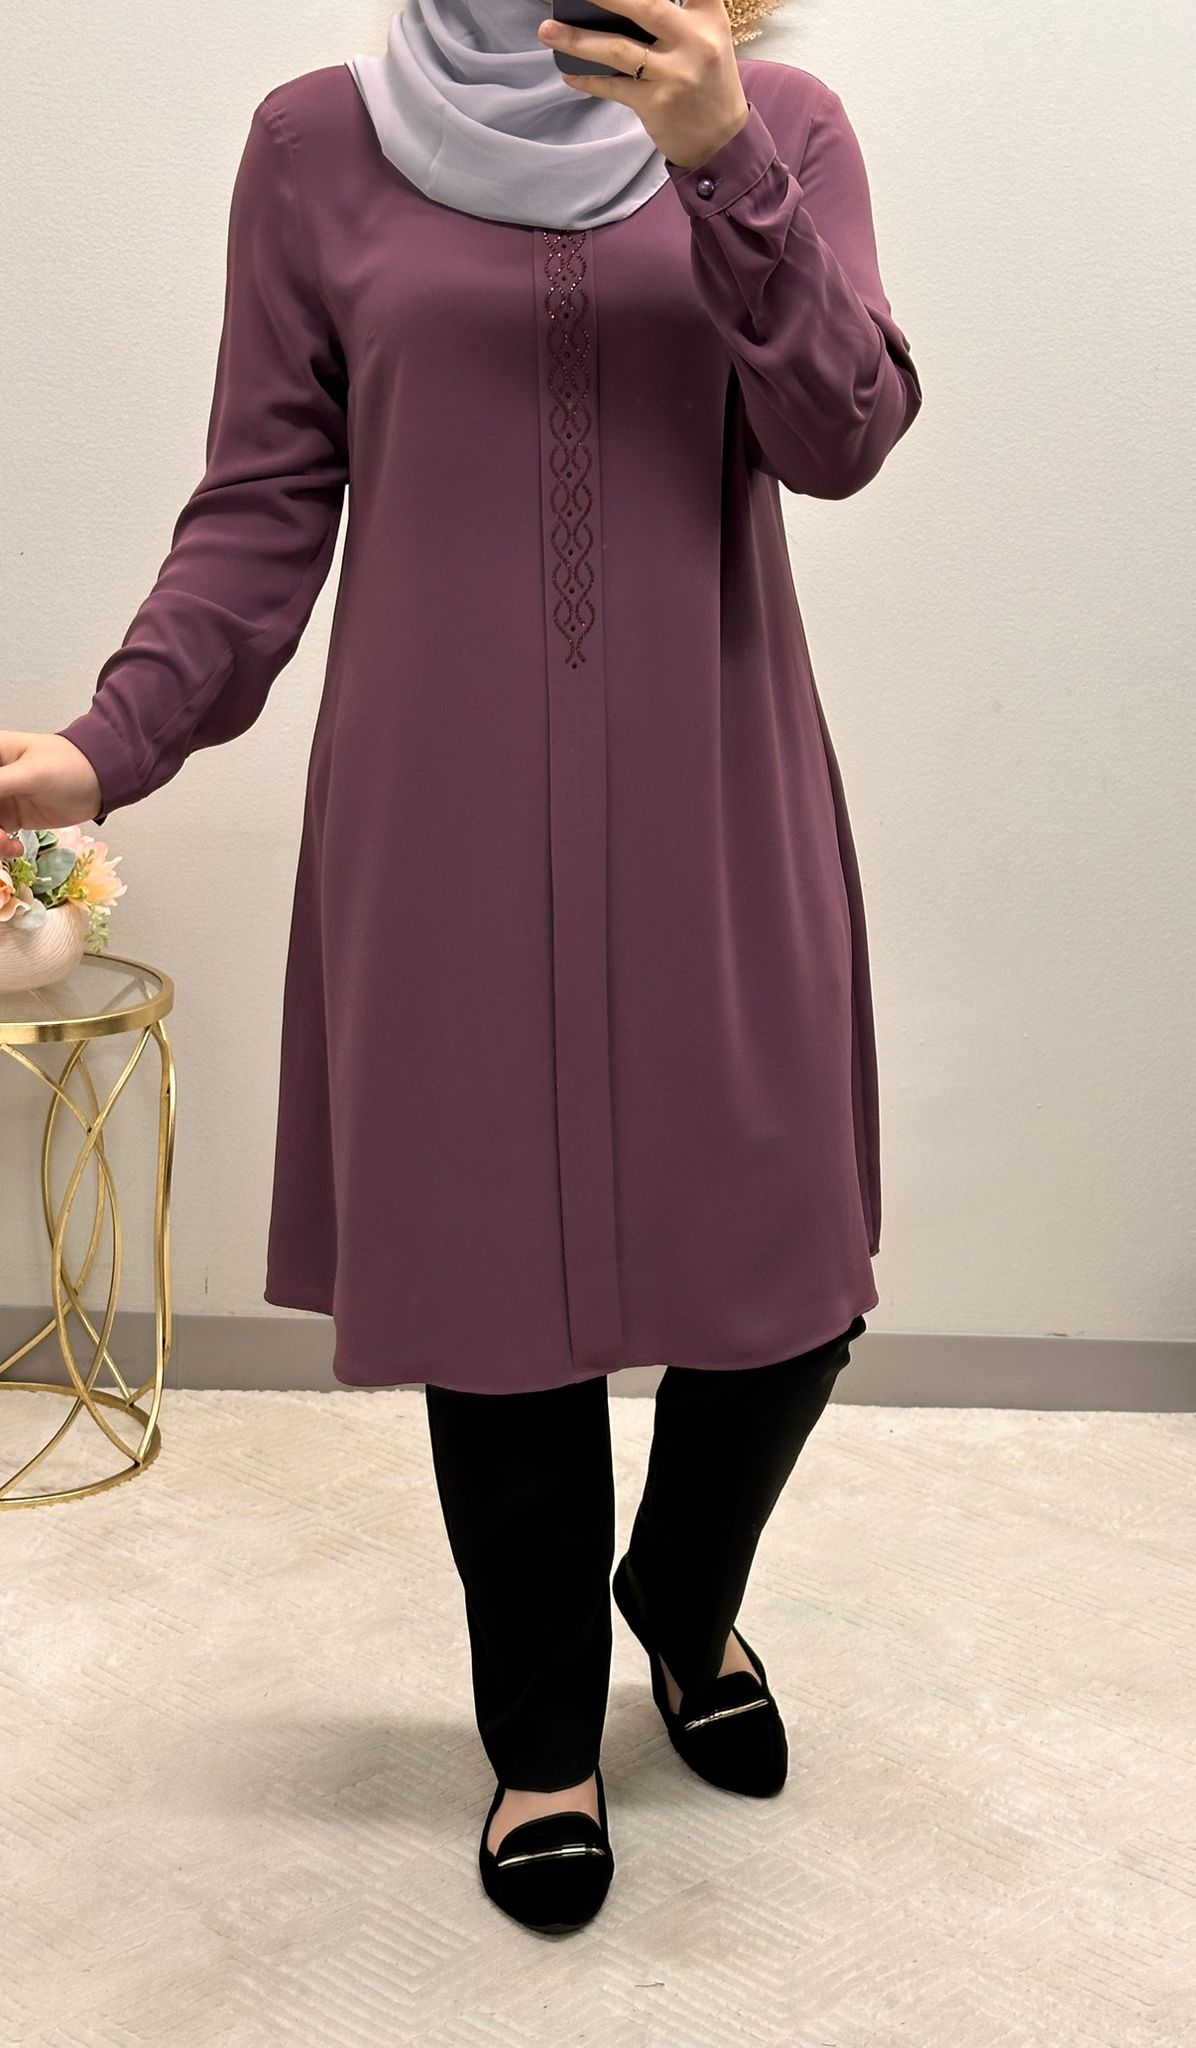 Modest Tunic blouse front strass embellished